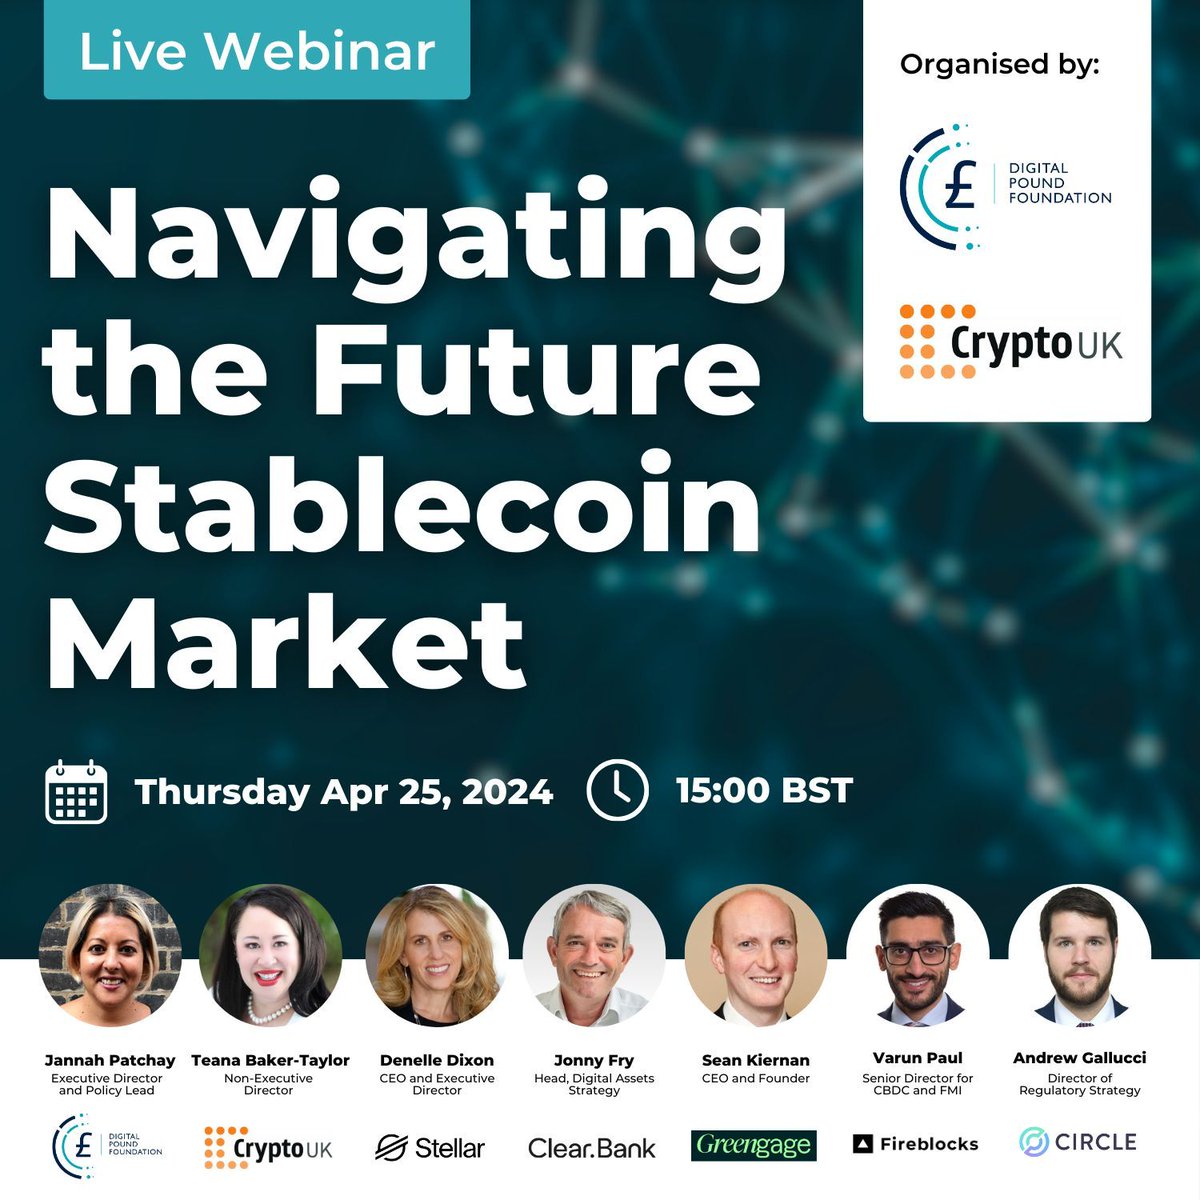 Join us on Thursday 25 April for 'Navigating the Future #Stablecoin Market' - a live #webinar with @CryptoUKAssoc, @StellarOrg, @clear_bank, @GreengageCo, @FireblocksHQ, and @circle. Reserve your place for FREE 👉 buff.ly/4aj7QfZ ... #Fintech #Crypto #Blockchain